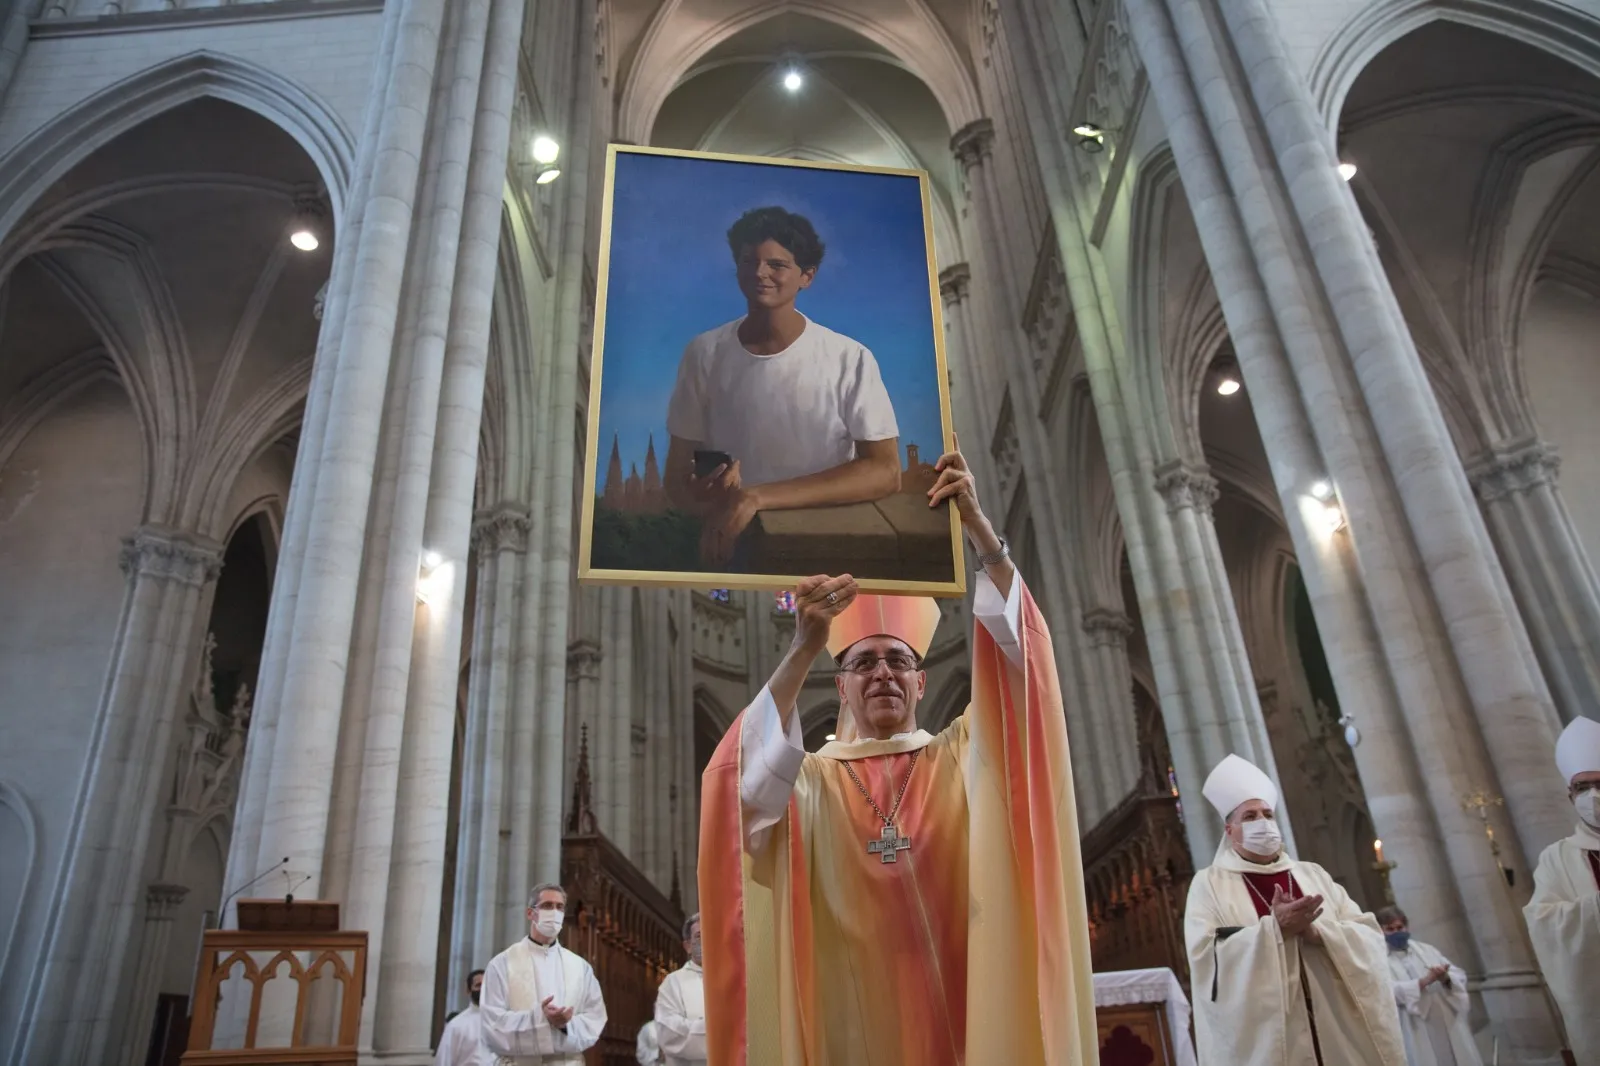 Cardinal-elect Víctor Manuel Fernández, shown holding aloft an image of Blessed Carlo Acutis, says he promoted eucharistic adoration, Bible studies, the rosary, and youth prayer groups as a priest and bishop in Argentina. Credit: Courtesy of the Archdiocese of La Plata